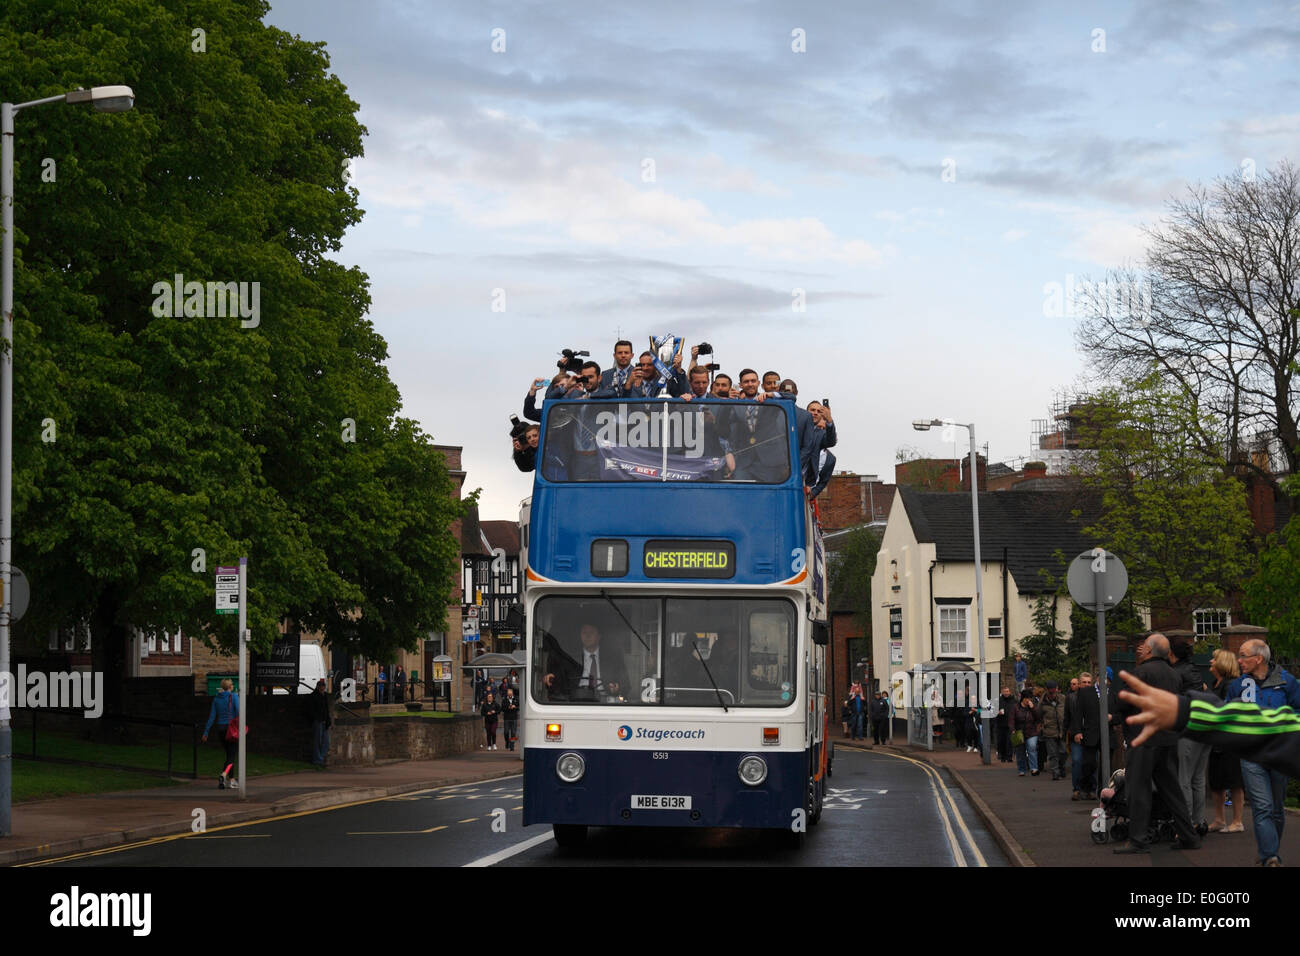 Chesterfield, UK 12th May, 2014 Chesterfield F.C. football team, league 2 champions, open top bus parade and civic reception at Chesterfield town hall Derbyshire England, UK. Monday 12th May 2014 Stock Photo